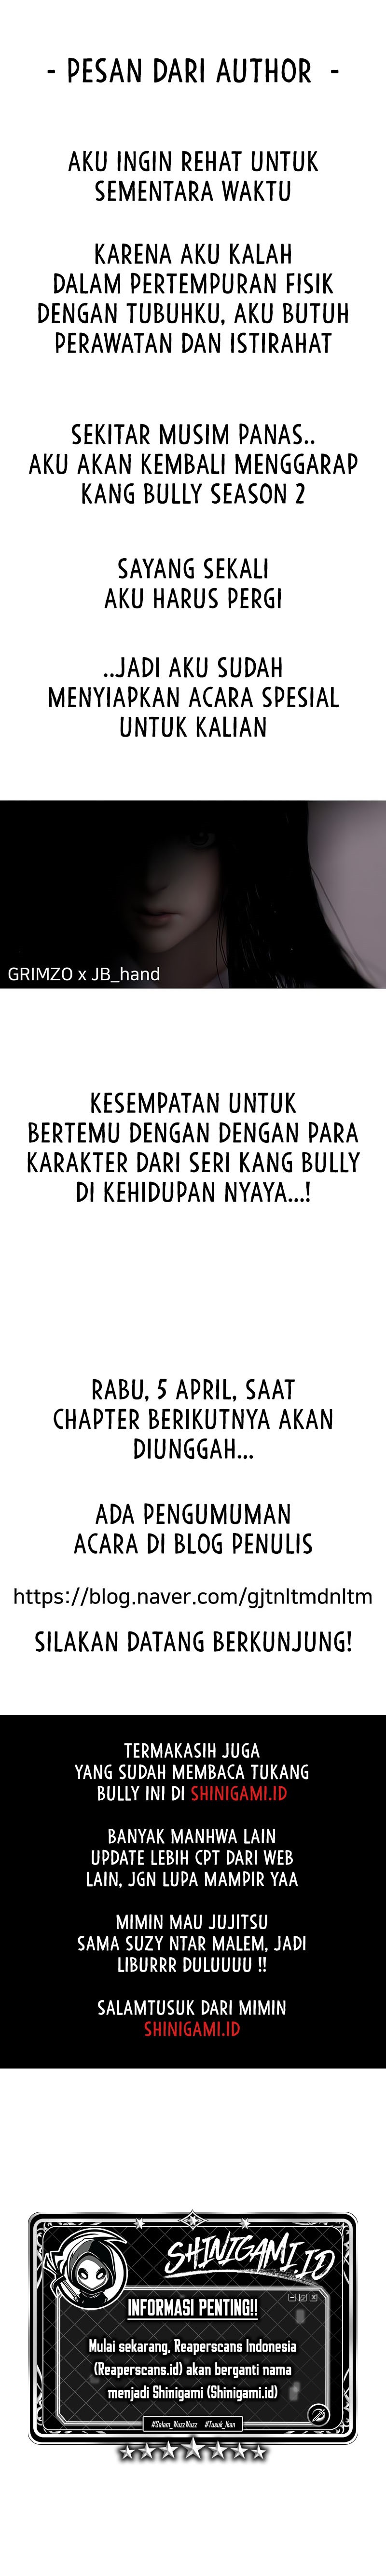 The Bully In Charge Chapter 56